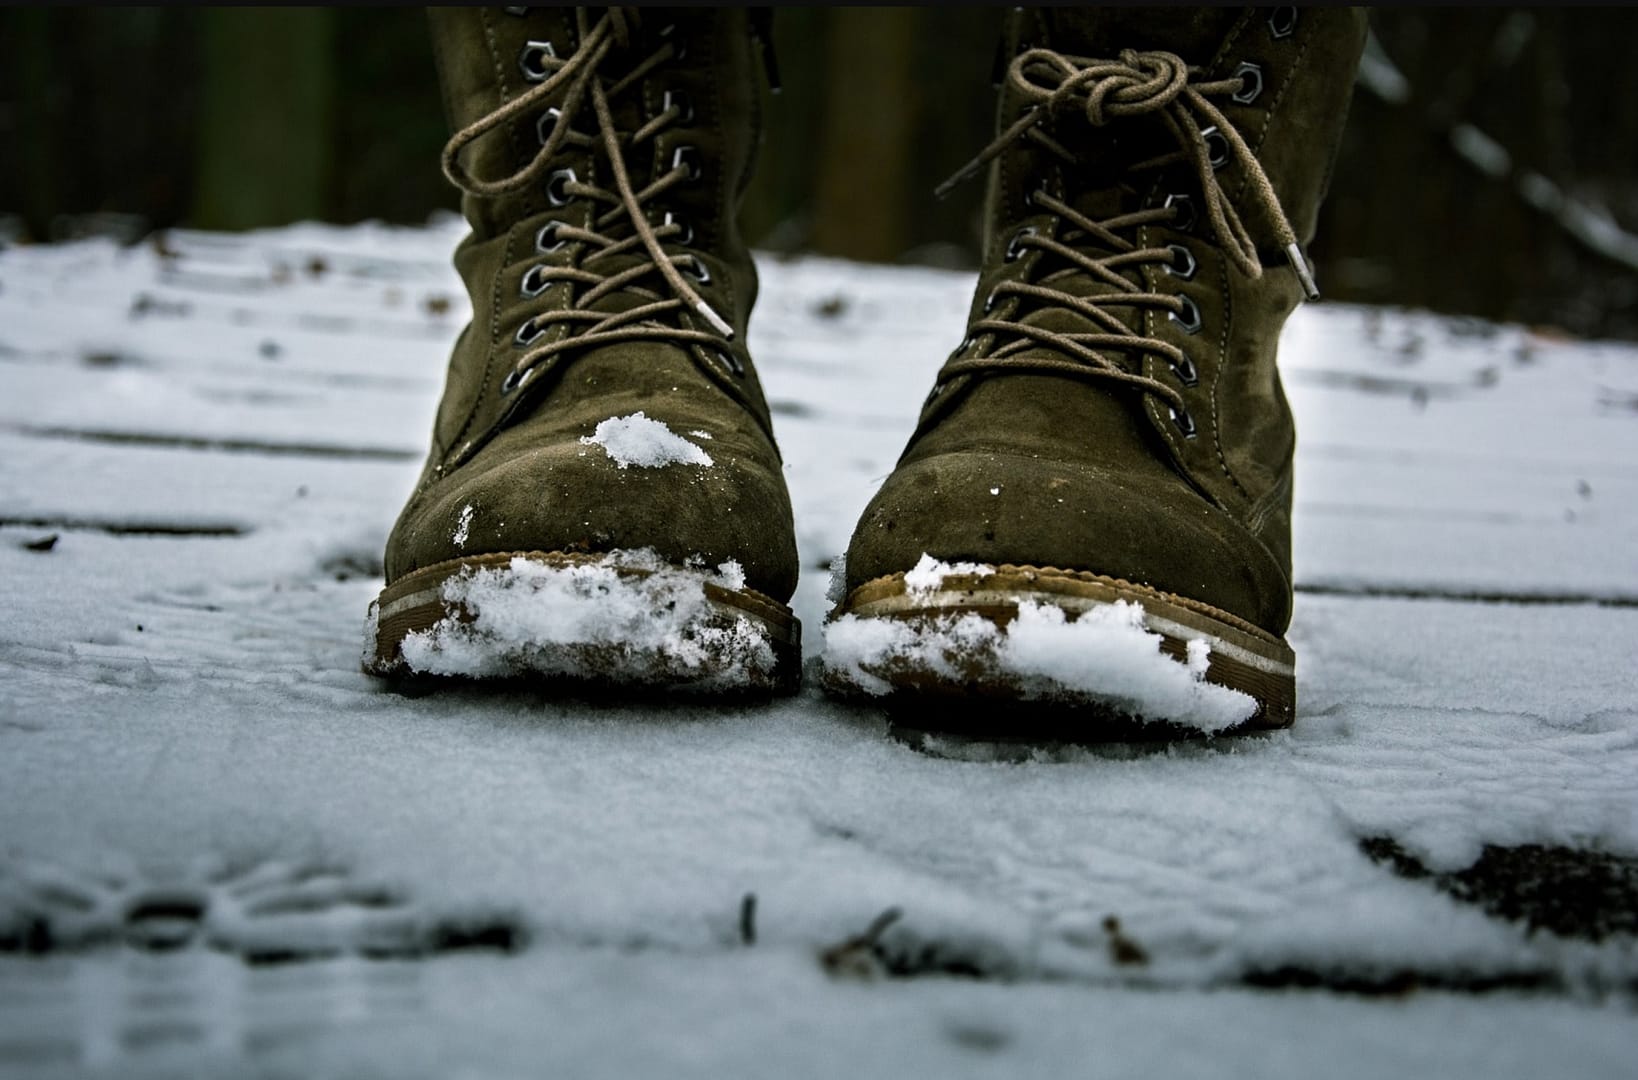 shoes in the snow - adapt to every climate - multi purpose